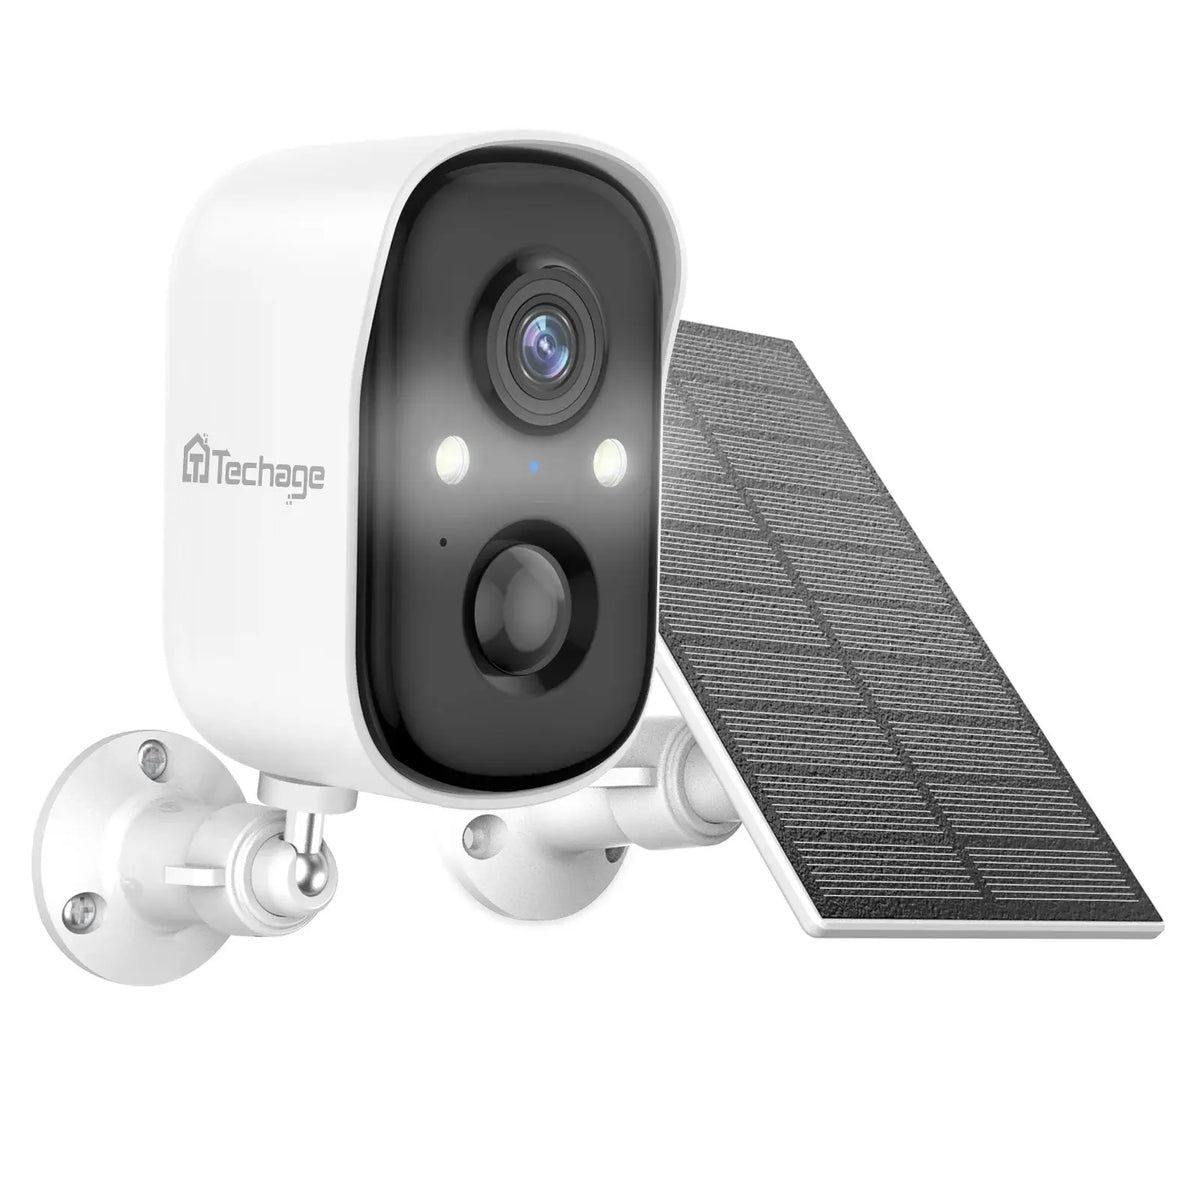 1080P Battery Powered Security WiFi Camera with Solar Panel